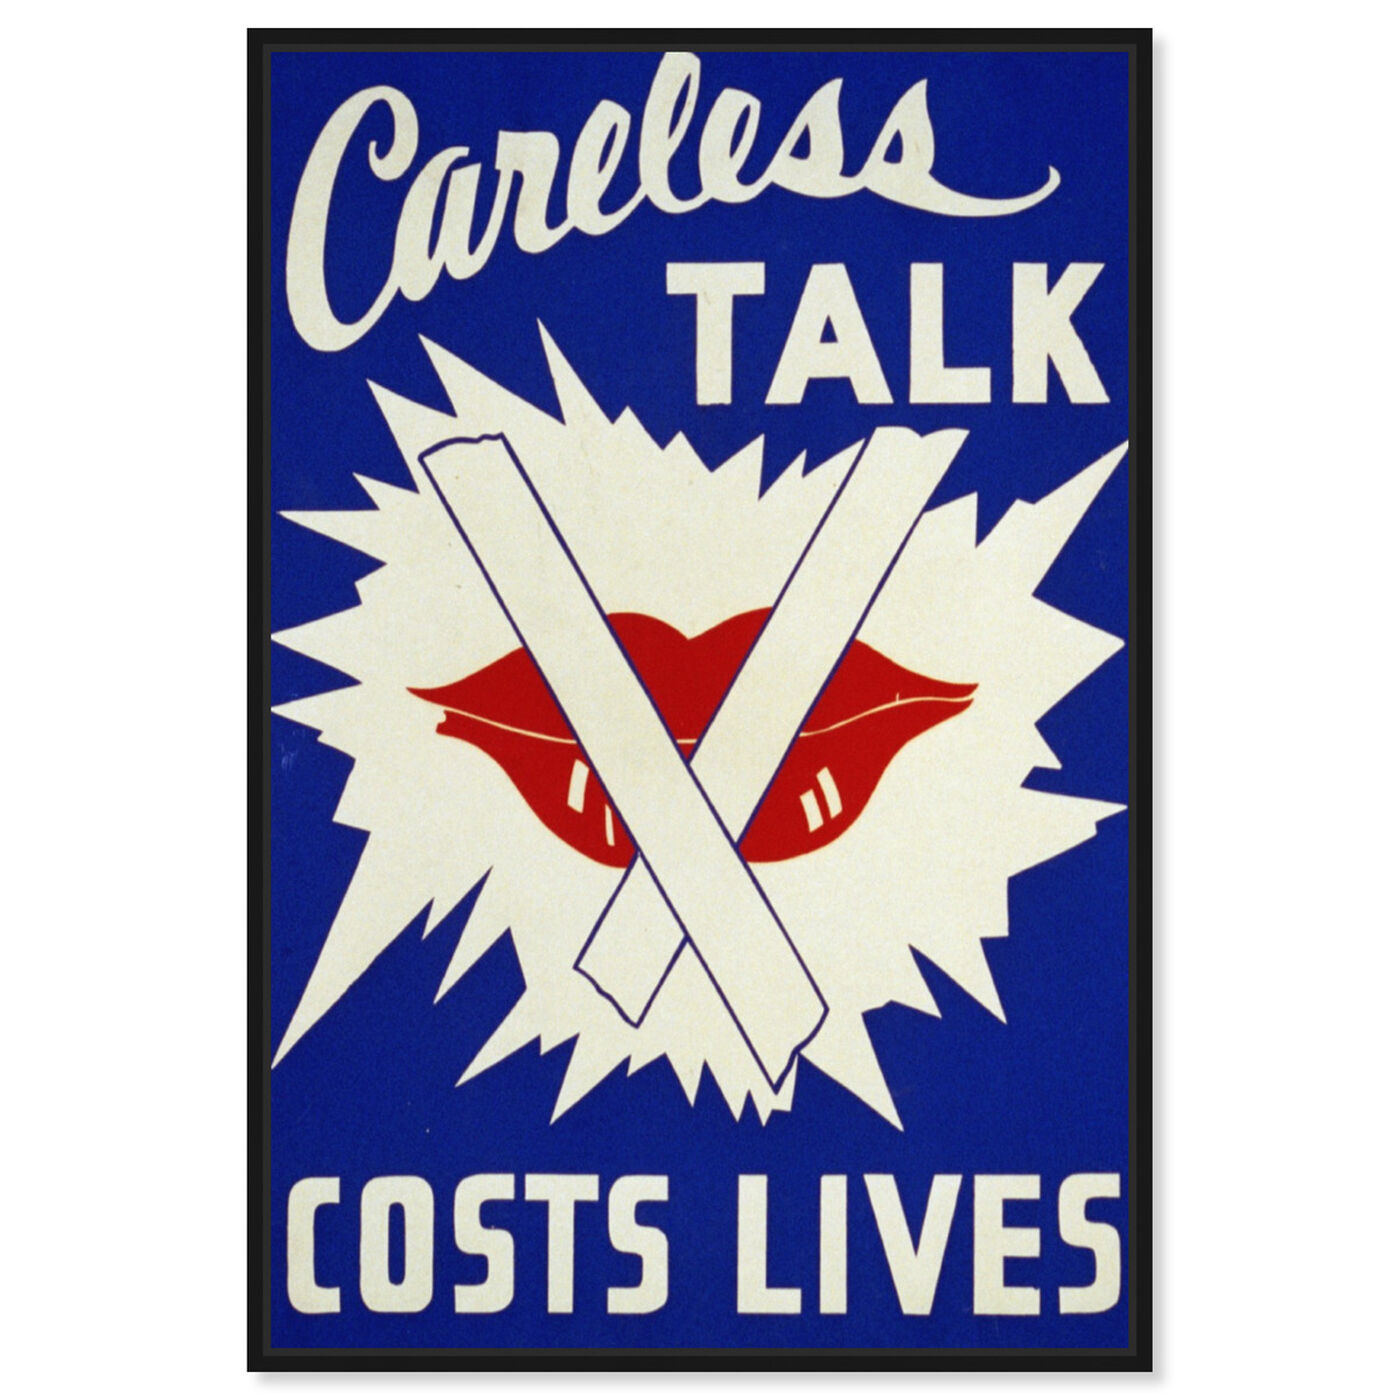 Front view of Careless Talk featuring advertising and posters art.